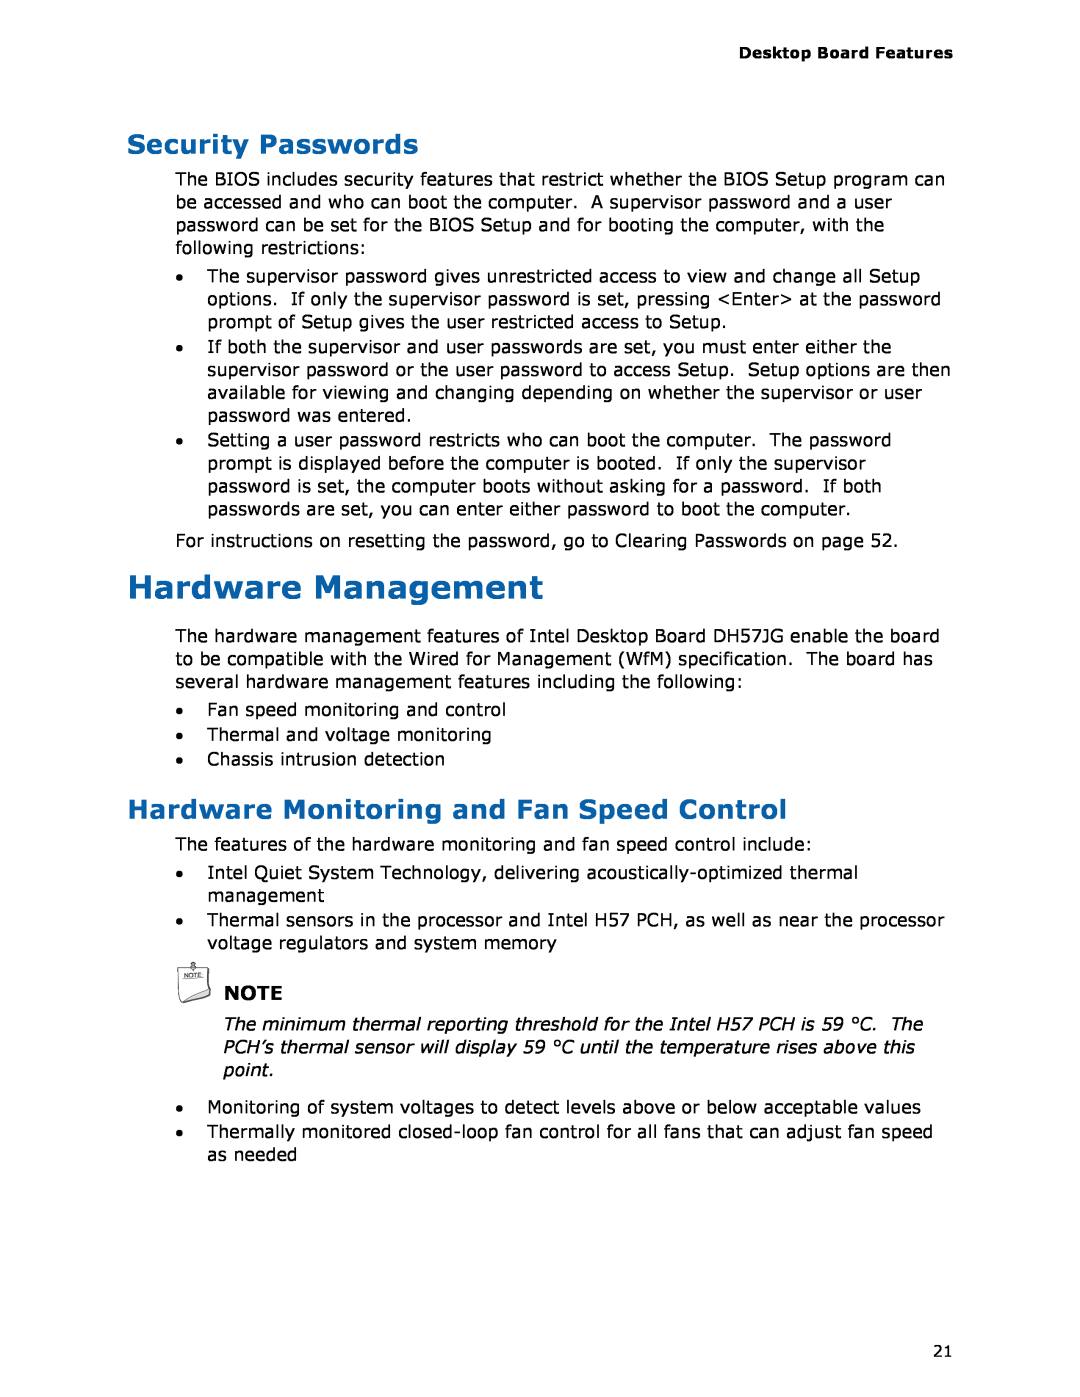 Intel BLKDH57JG manual Hardware Management, Security Passwords, Hardware Monitoring and Fan Speed Control 